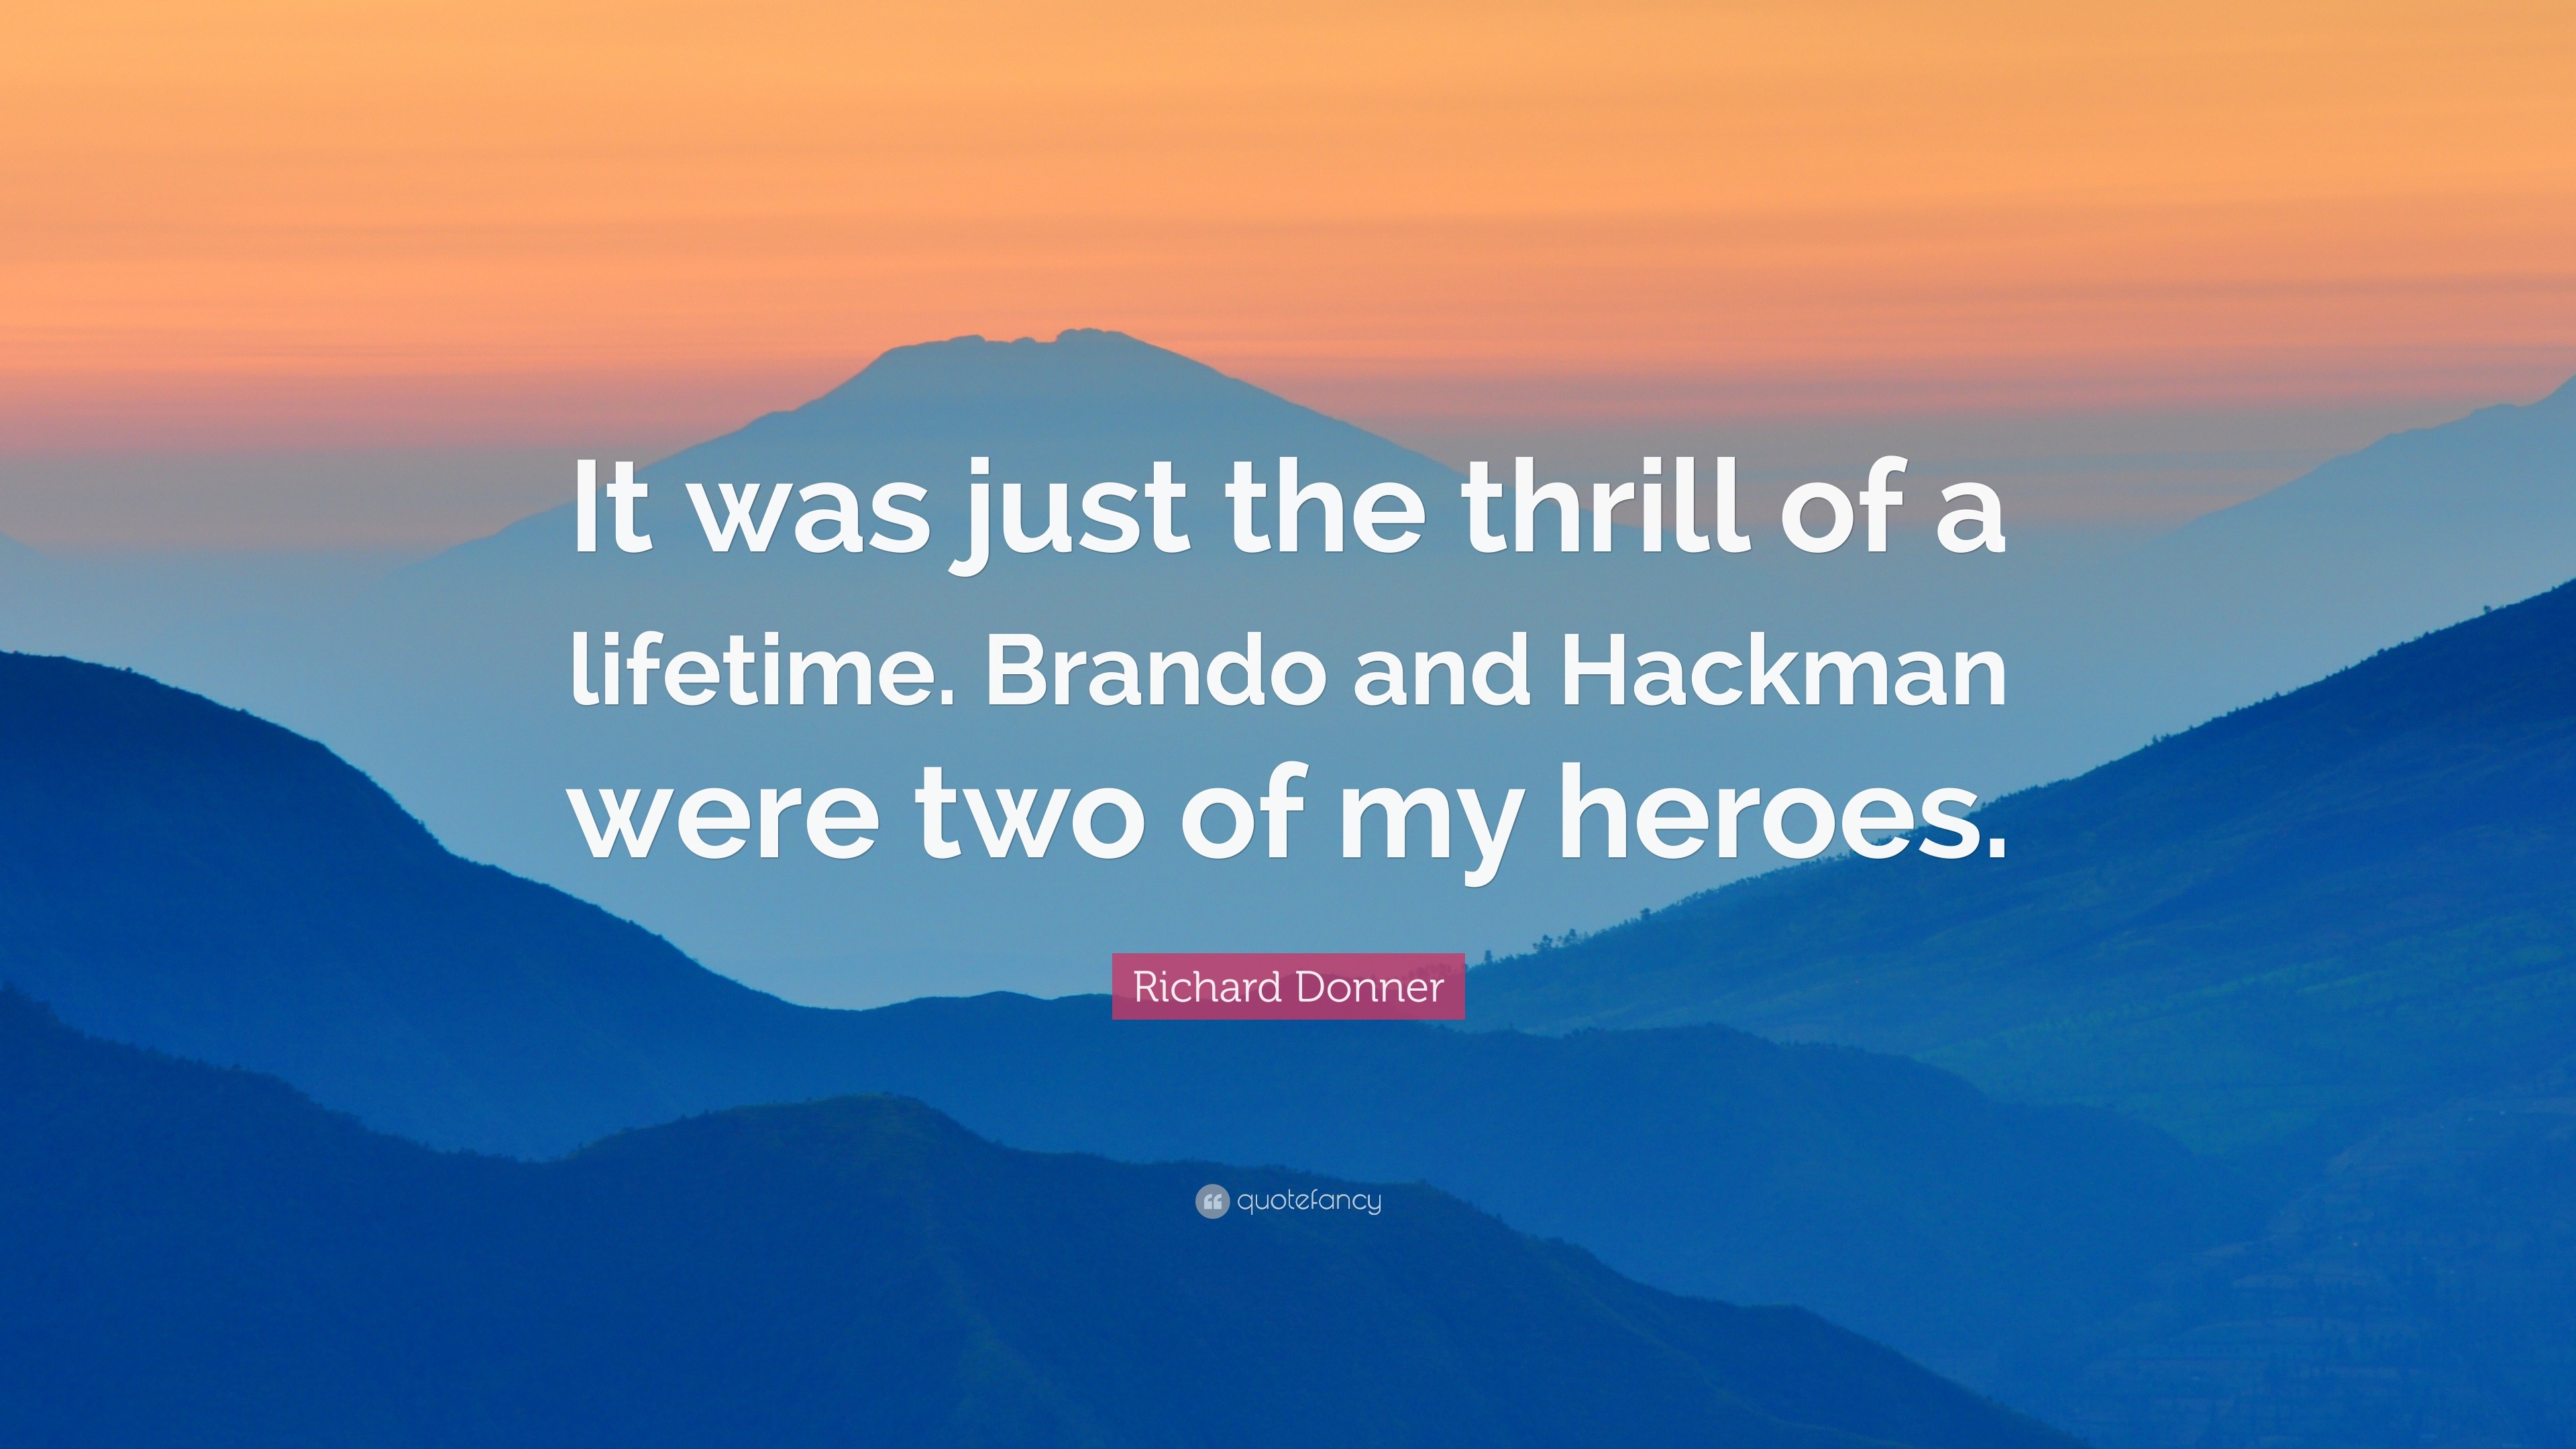 Richard Donner Quote: “It was just the thrill of a lifetime. Brando and ...